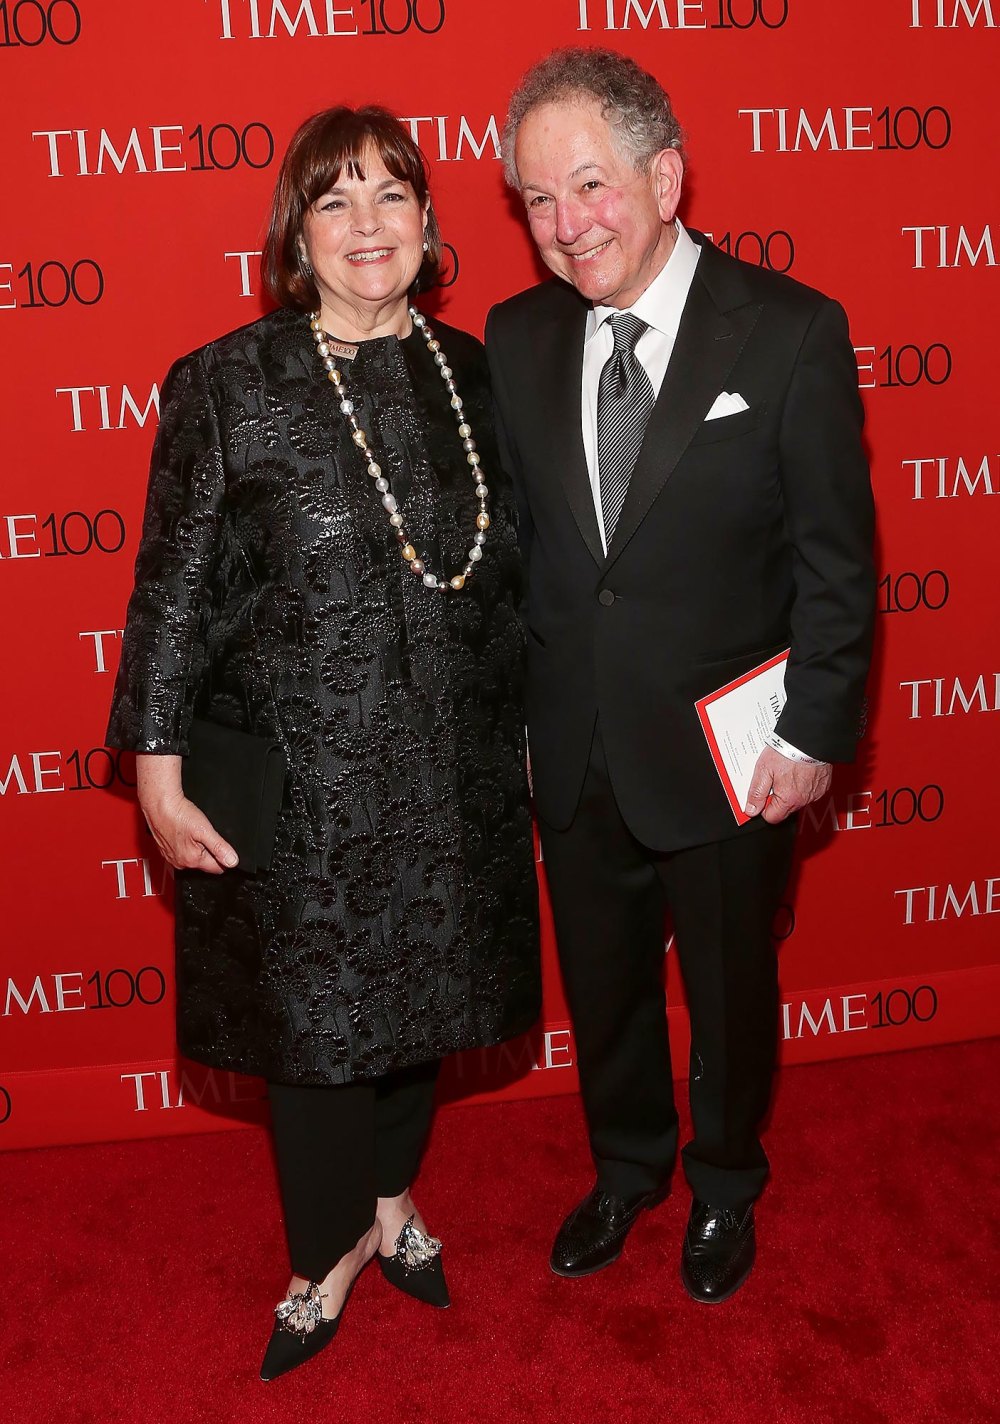 Ina Garten Says Husband Jeffrey Would Have 'Loved' to Have Kids but Wanted Her to Be Happy